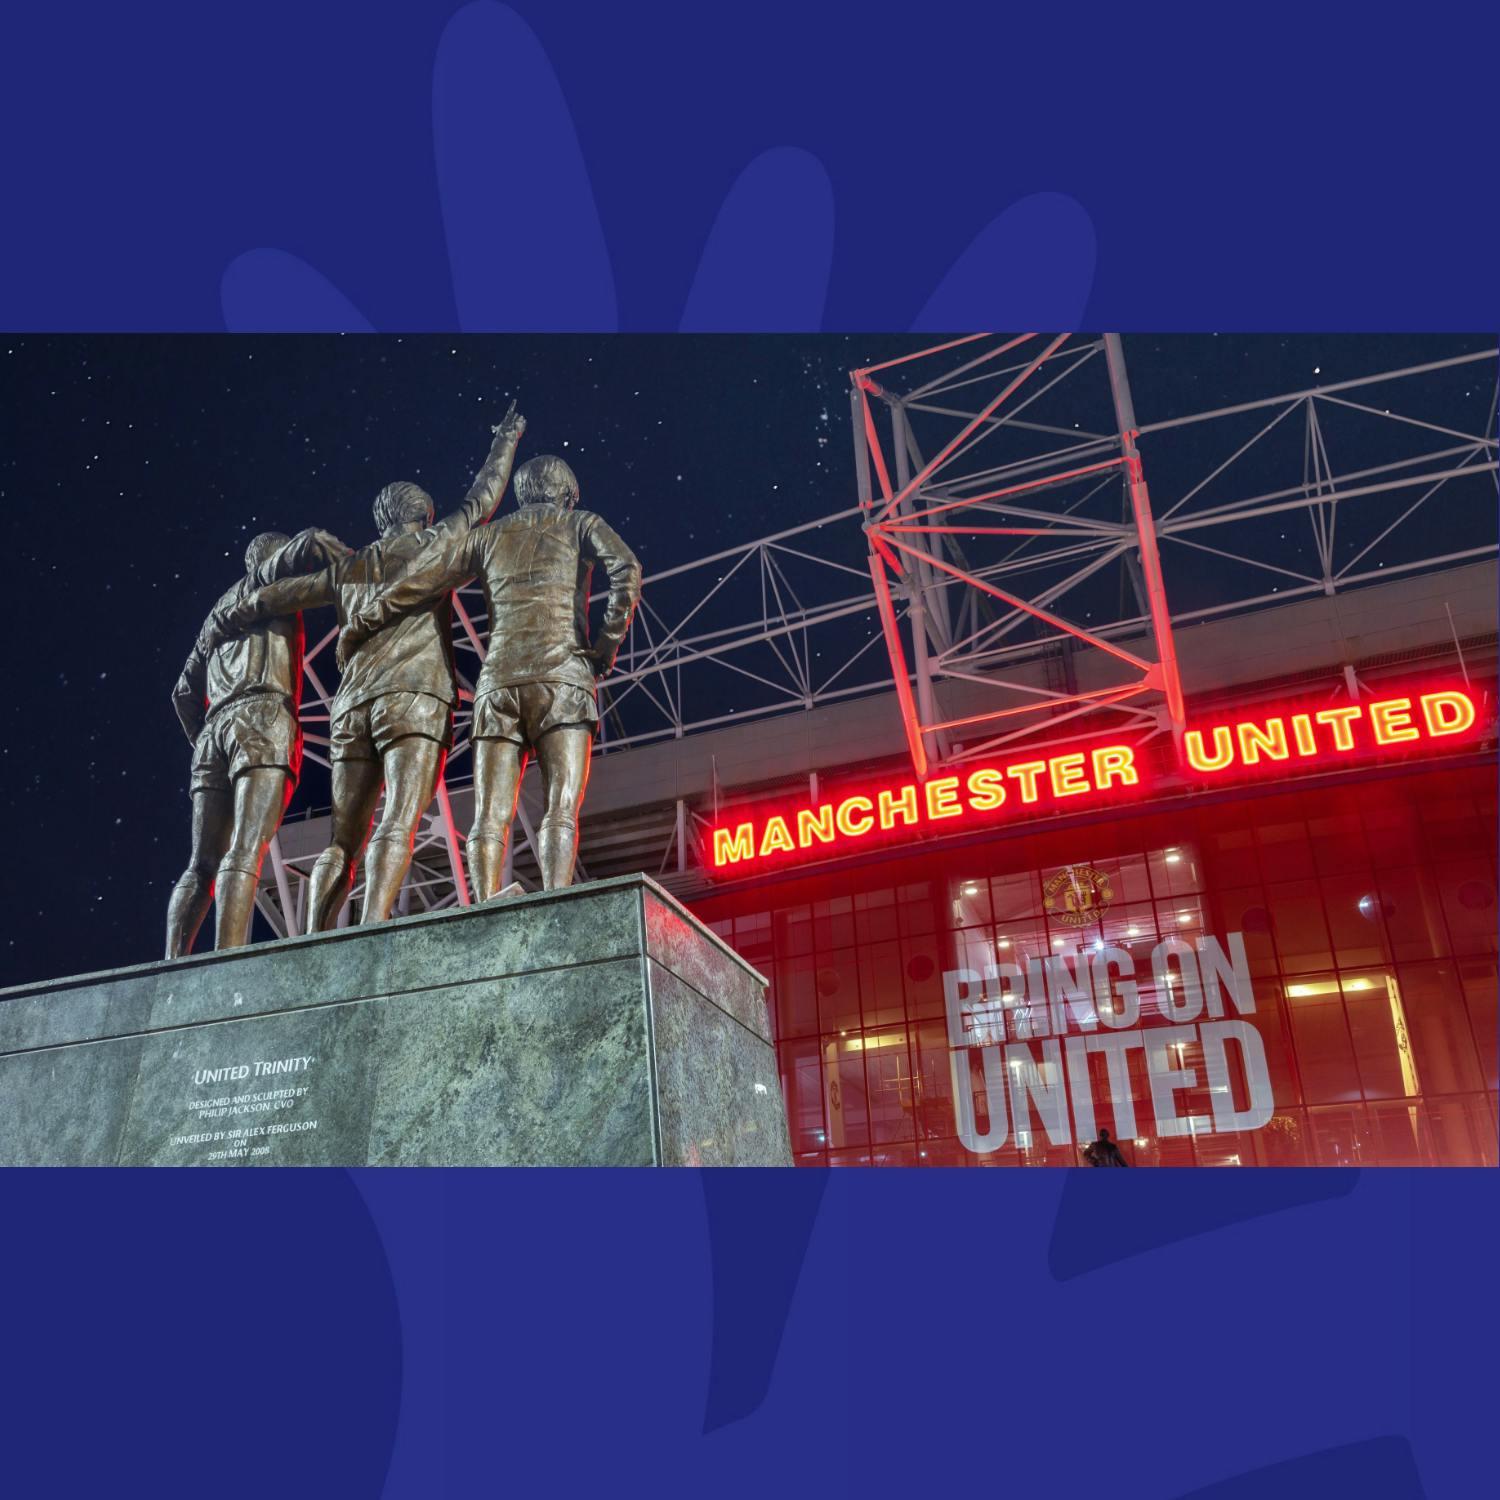 Man UTD Consider Selling Naming Rights To Old Trafford